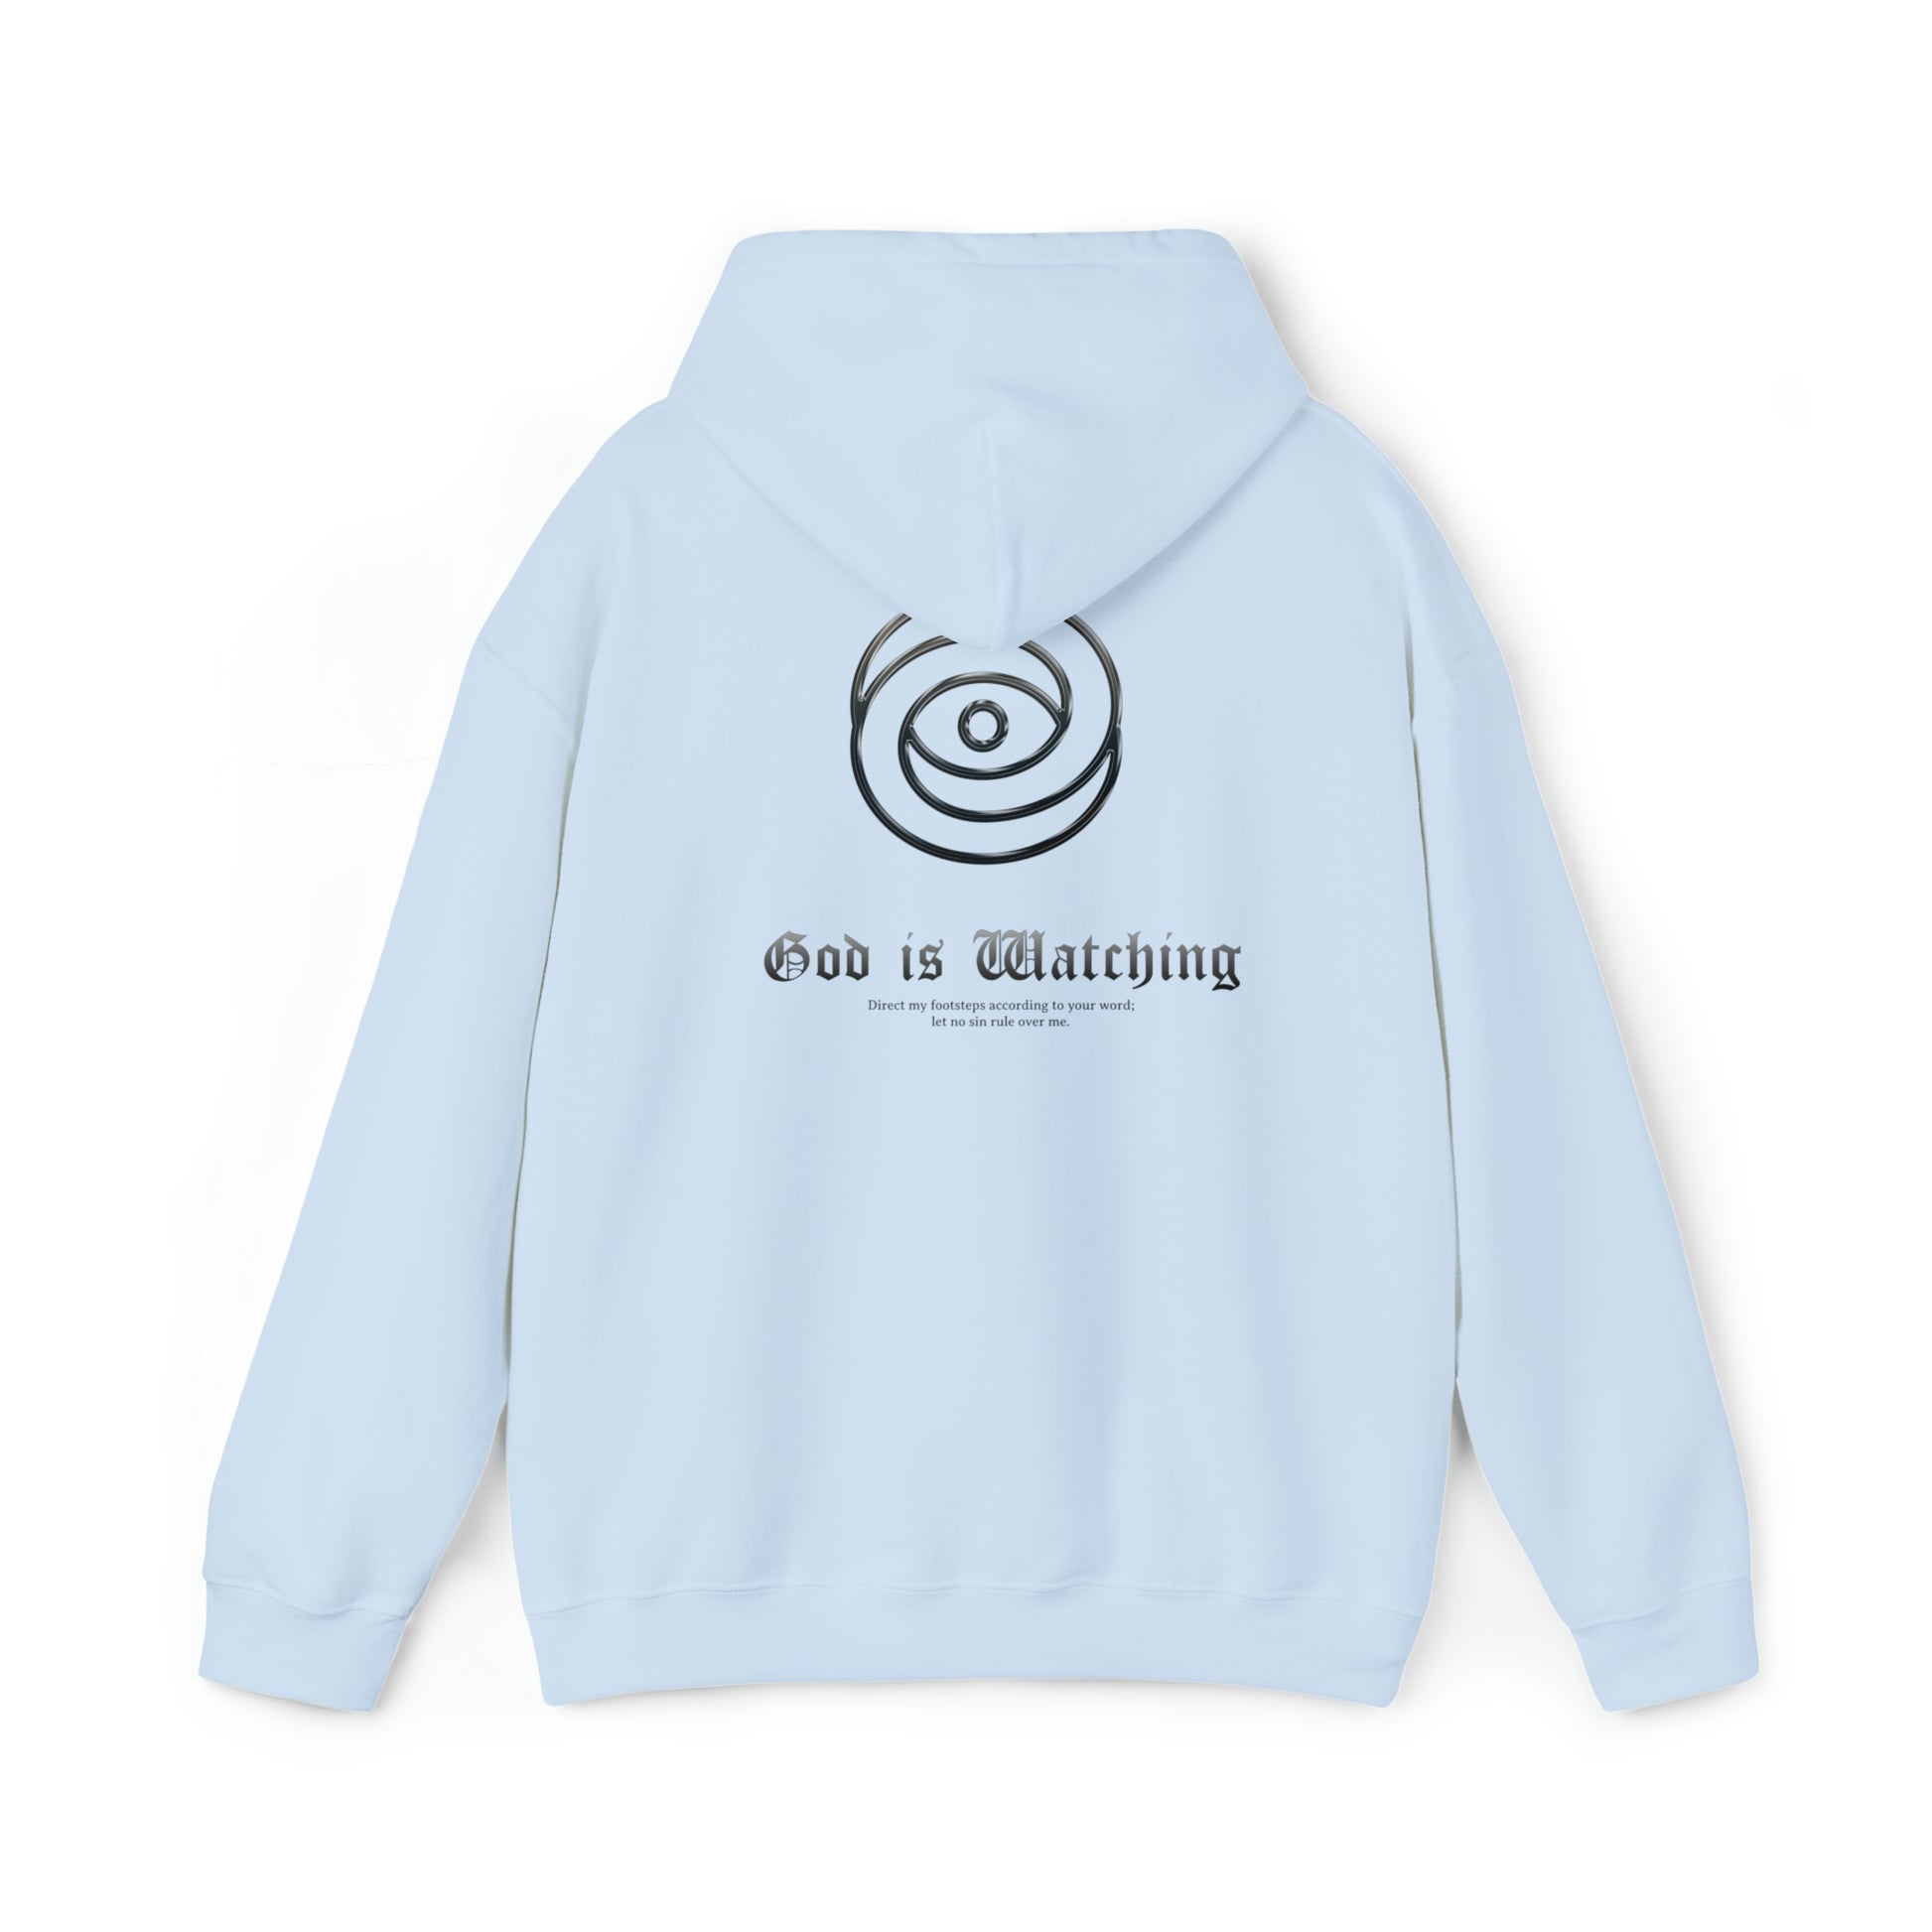 God is Watching hoodie -  L2KBoutique